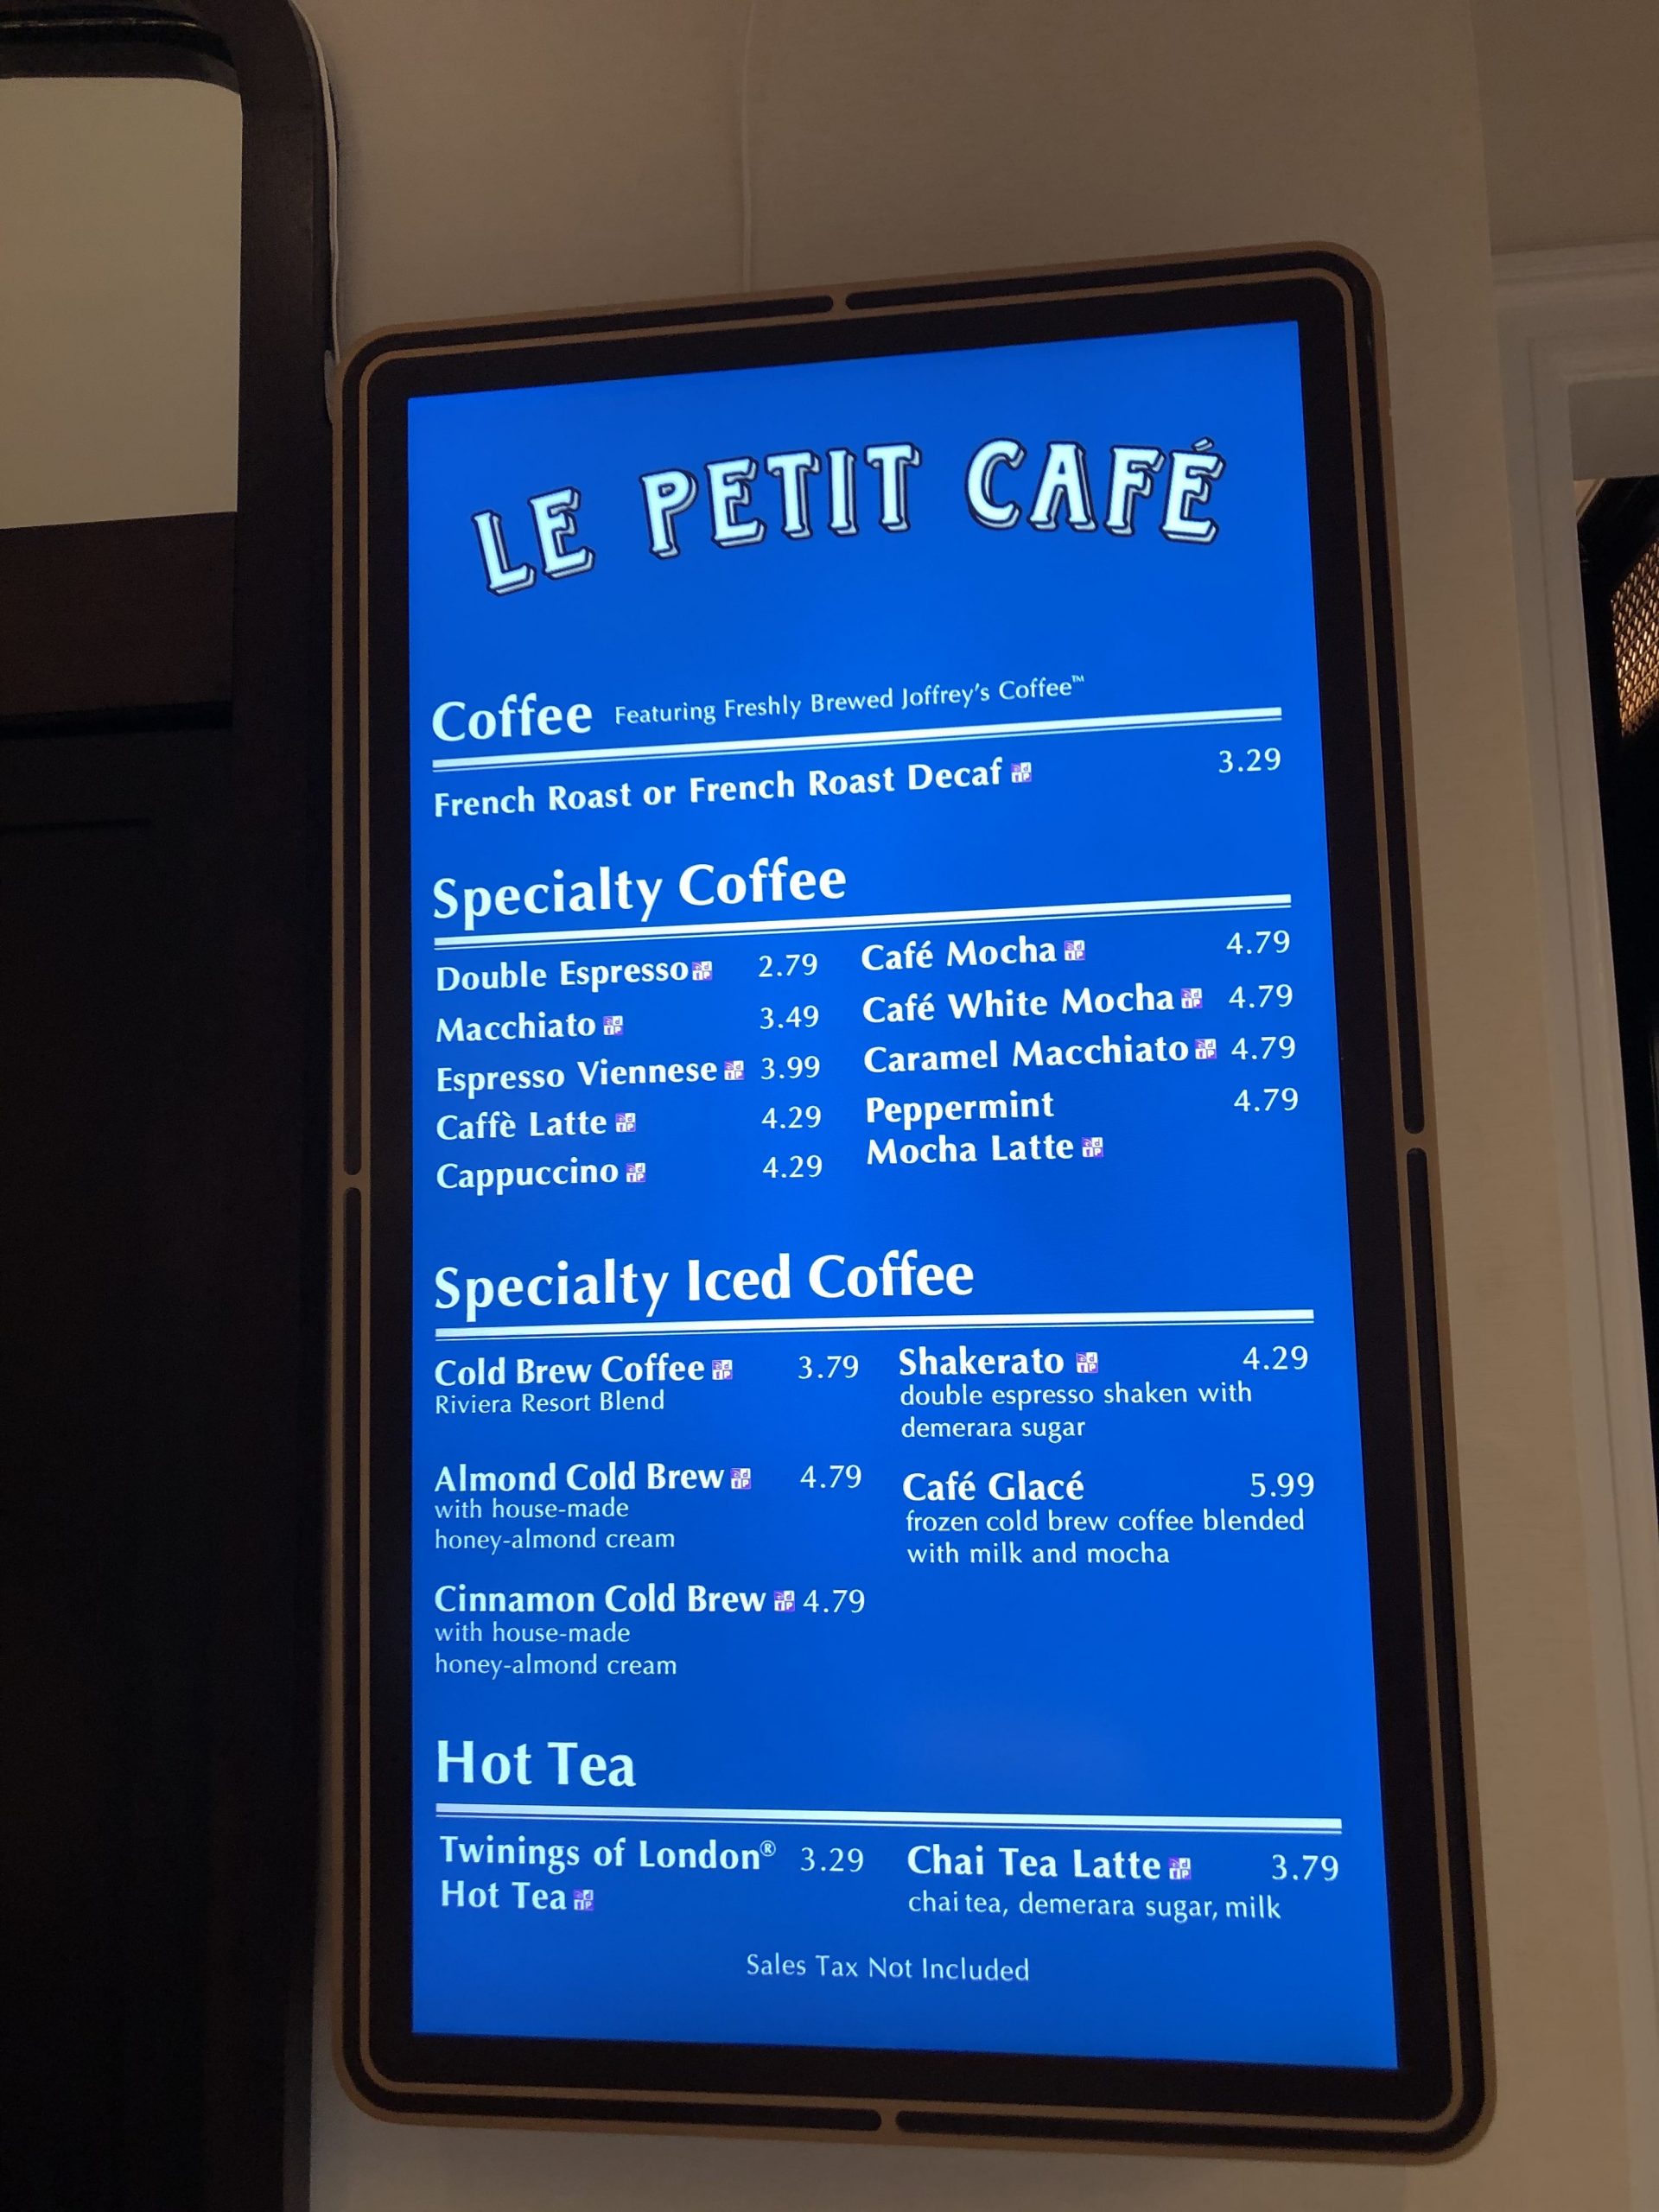 First Look: Le Petit Cafe at Disney’s Riviera Resort | TouringPlans.com